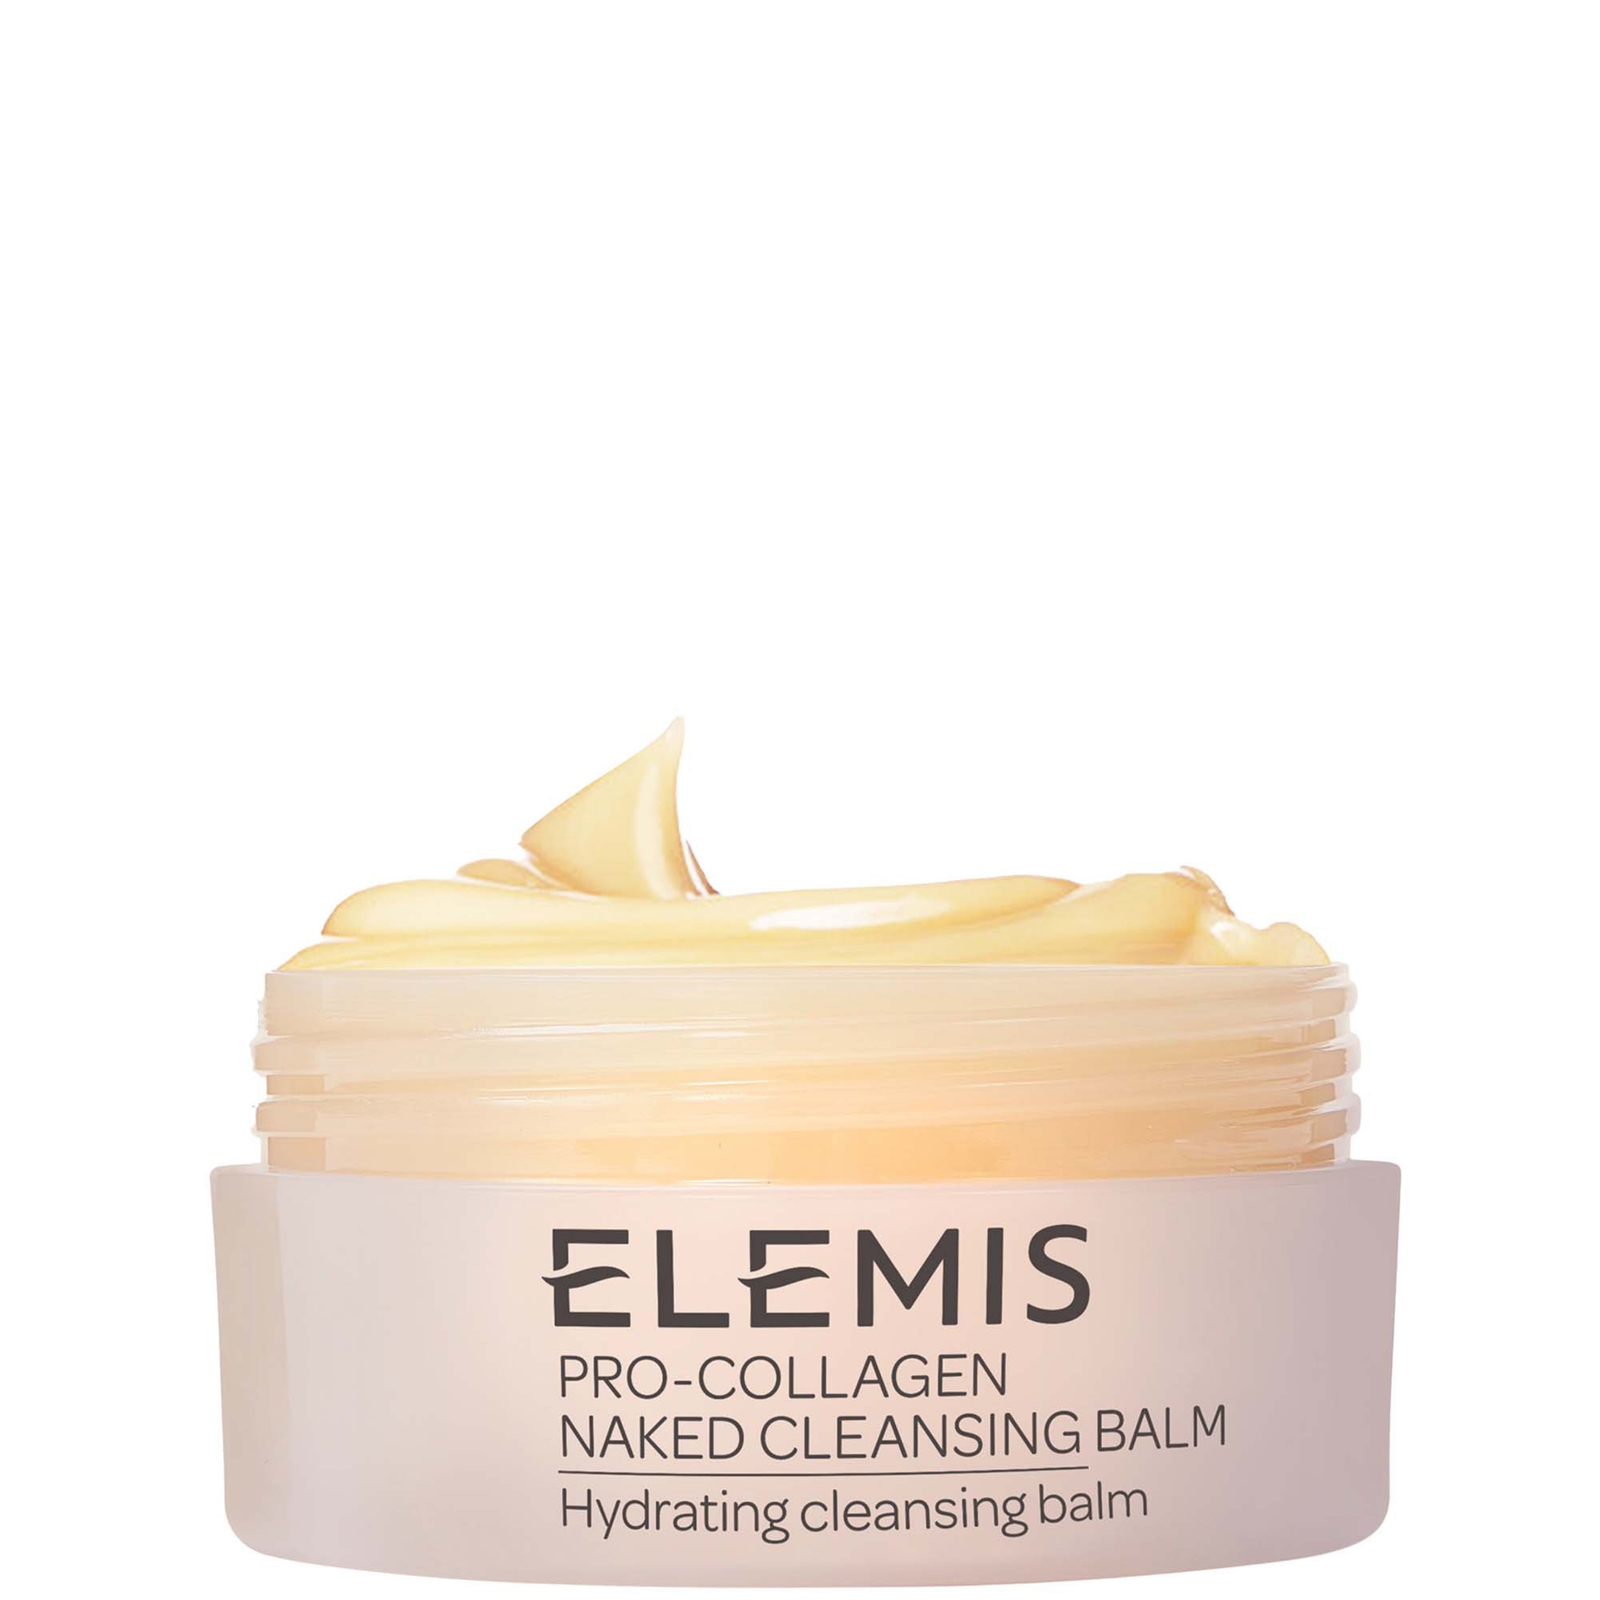 Elemis Pro-collagen Naked Cleansing Balm 100g In White